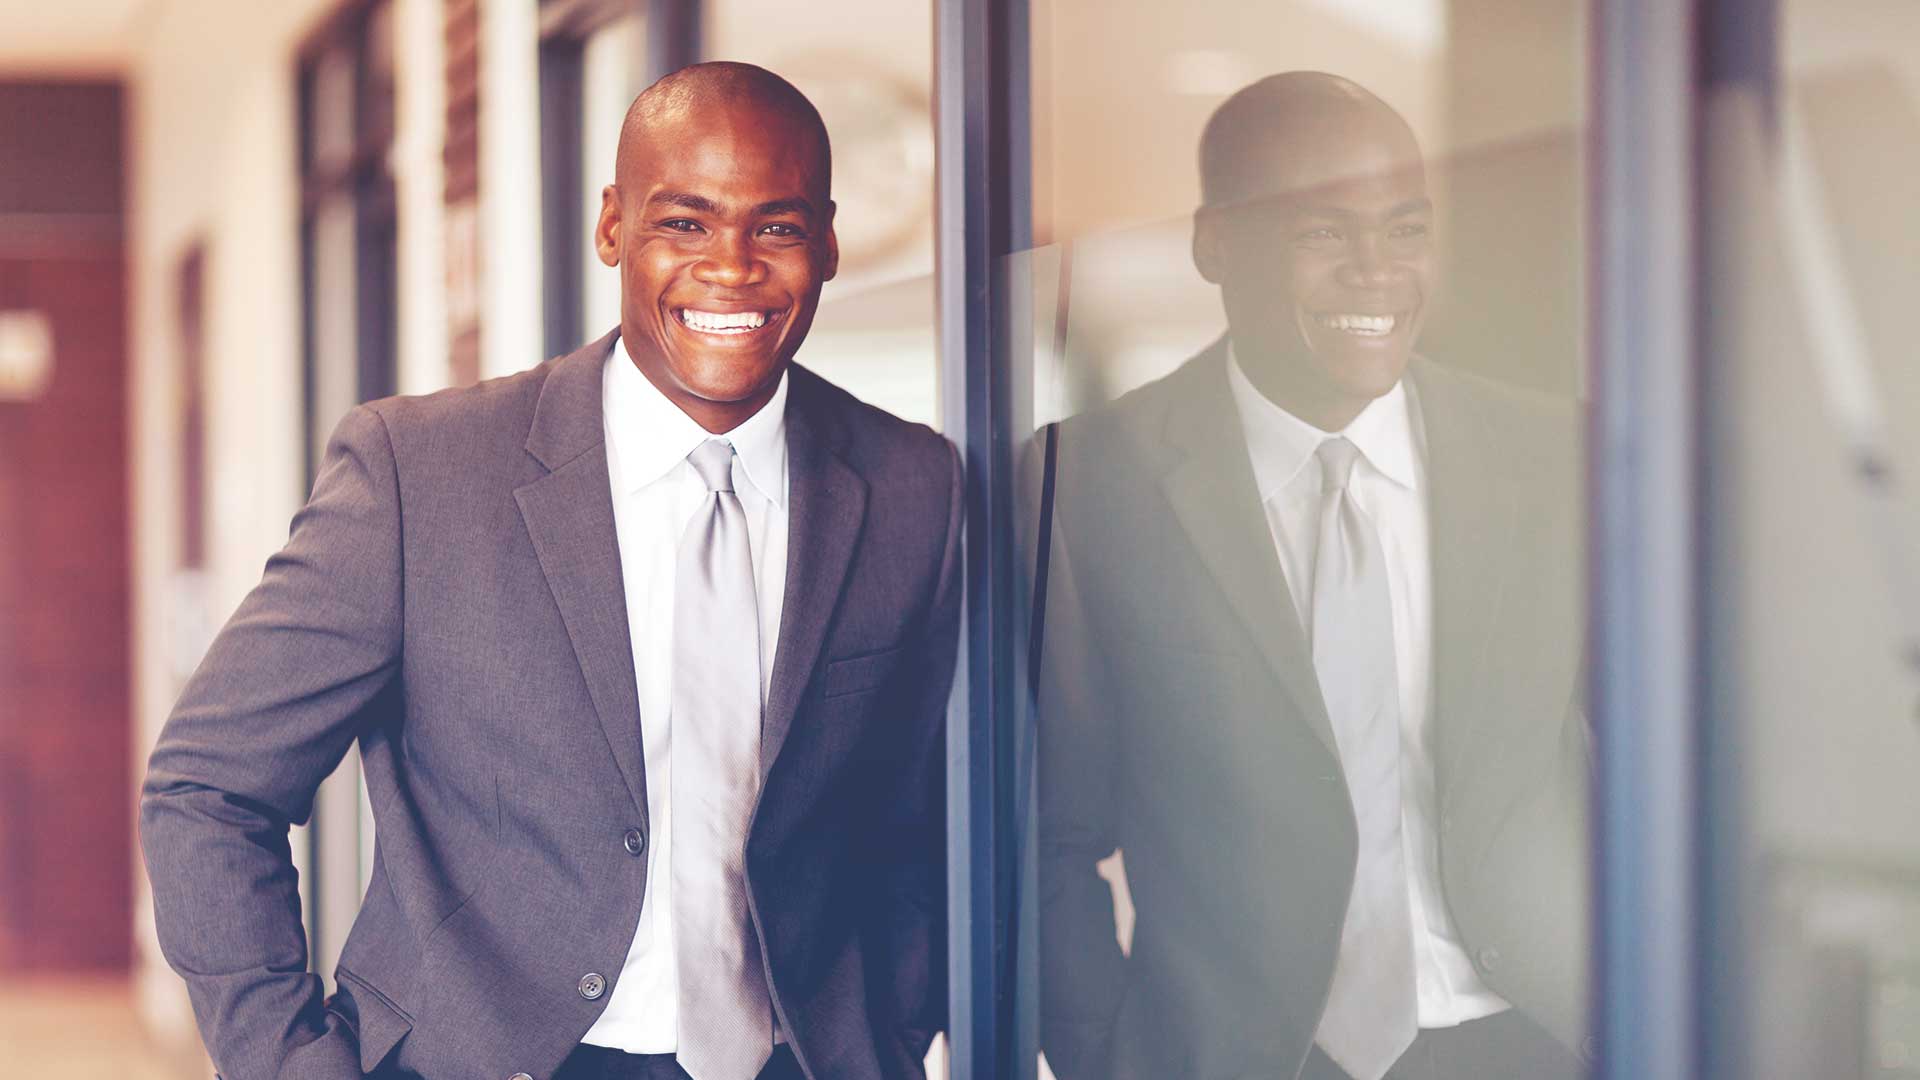 Professional man in a suit leaning up against a window smiling